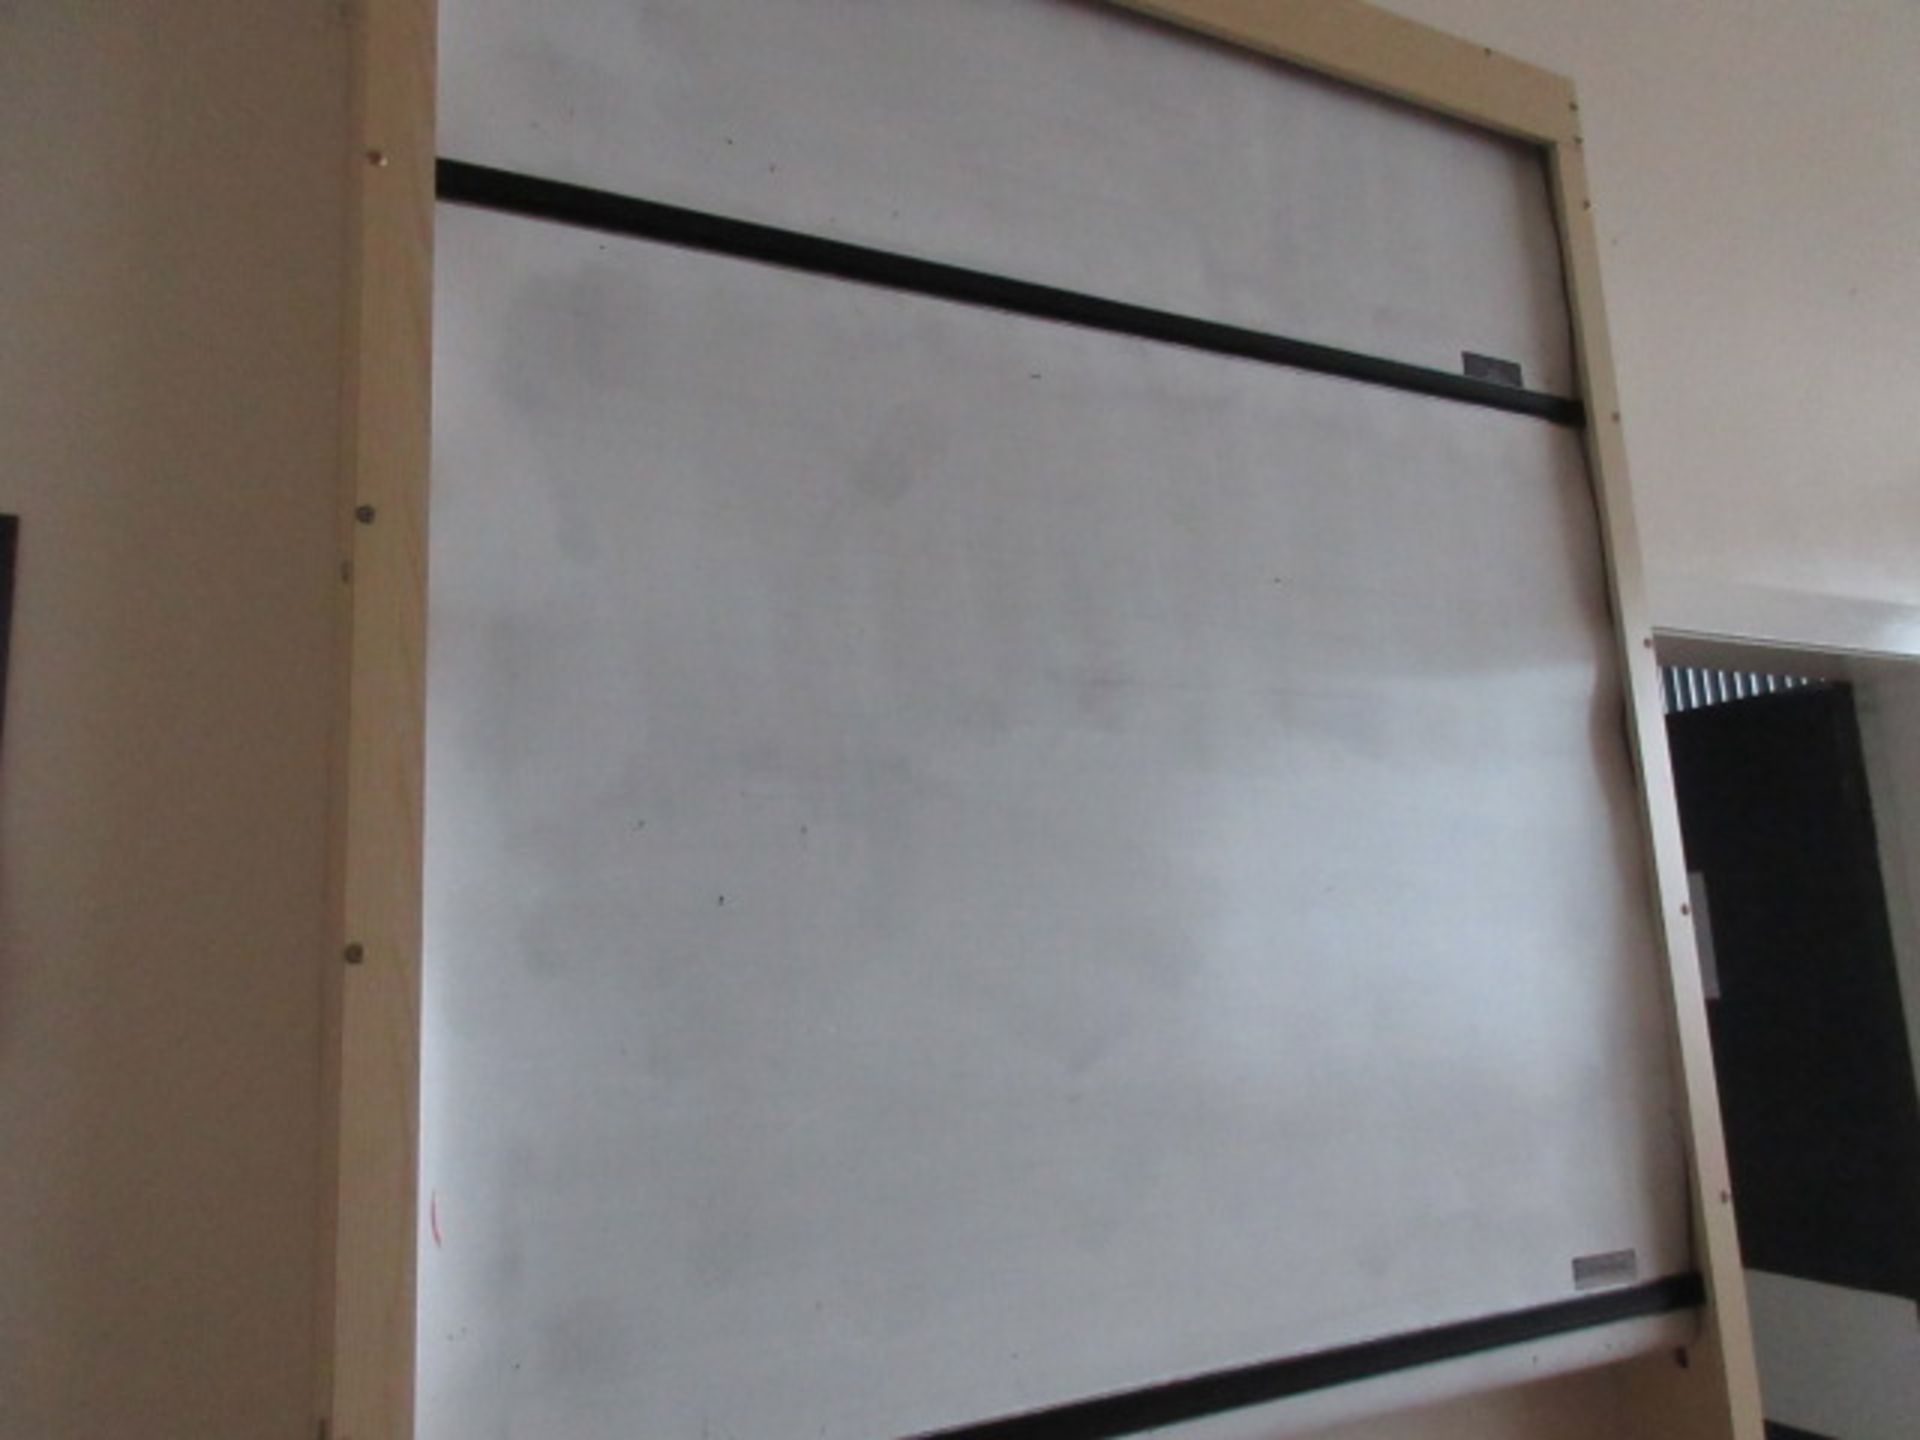 Scrolling white board 1250mm wide, dry wipe surface, wall mounted. Holehouse Road Science room R3 - Image 2 of 2